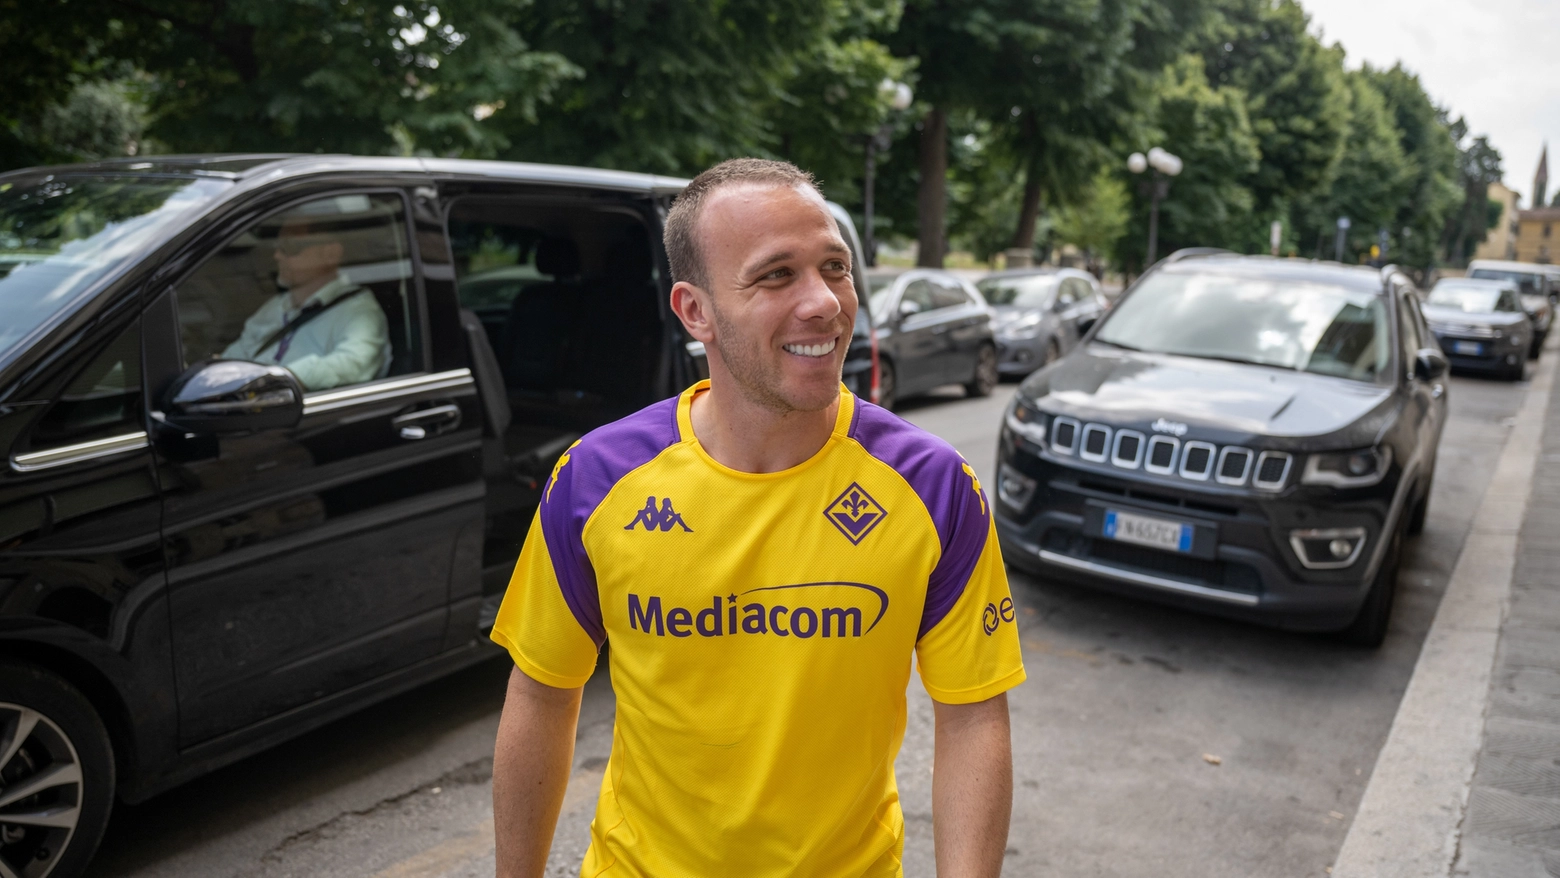 Arthur addressed his start at Fiorentina and didn’t rule out a return to Juventus after the loan spell in: “I’ve been comfortable from the start."